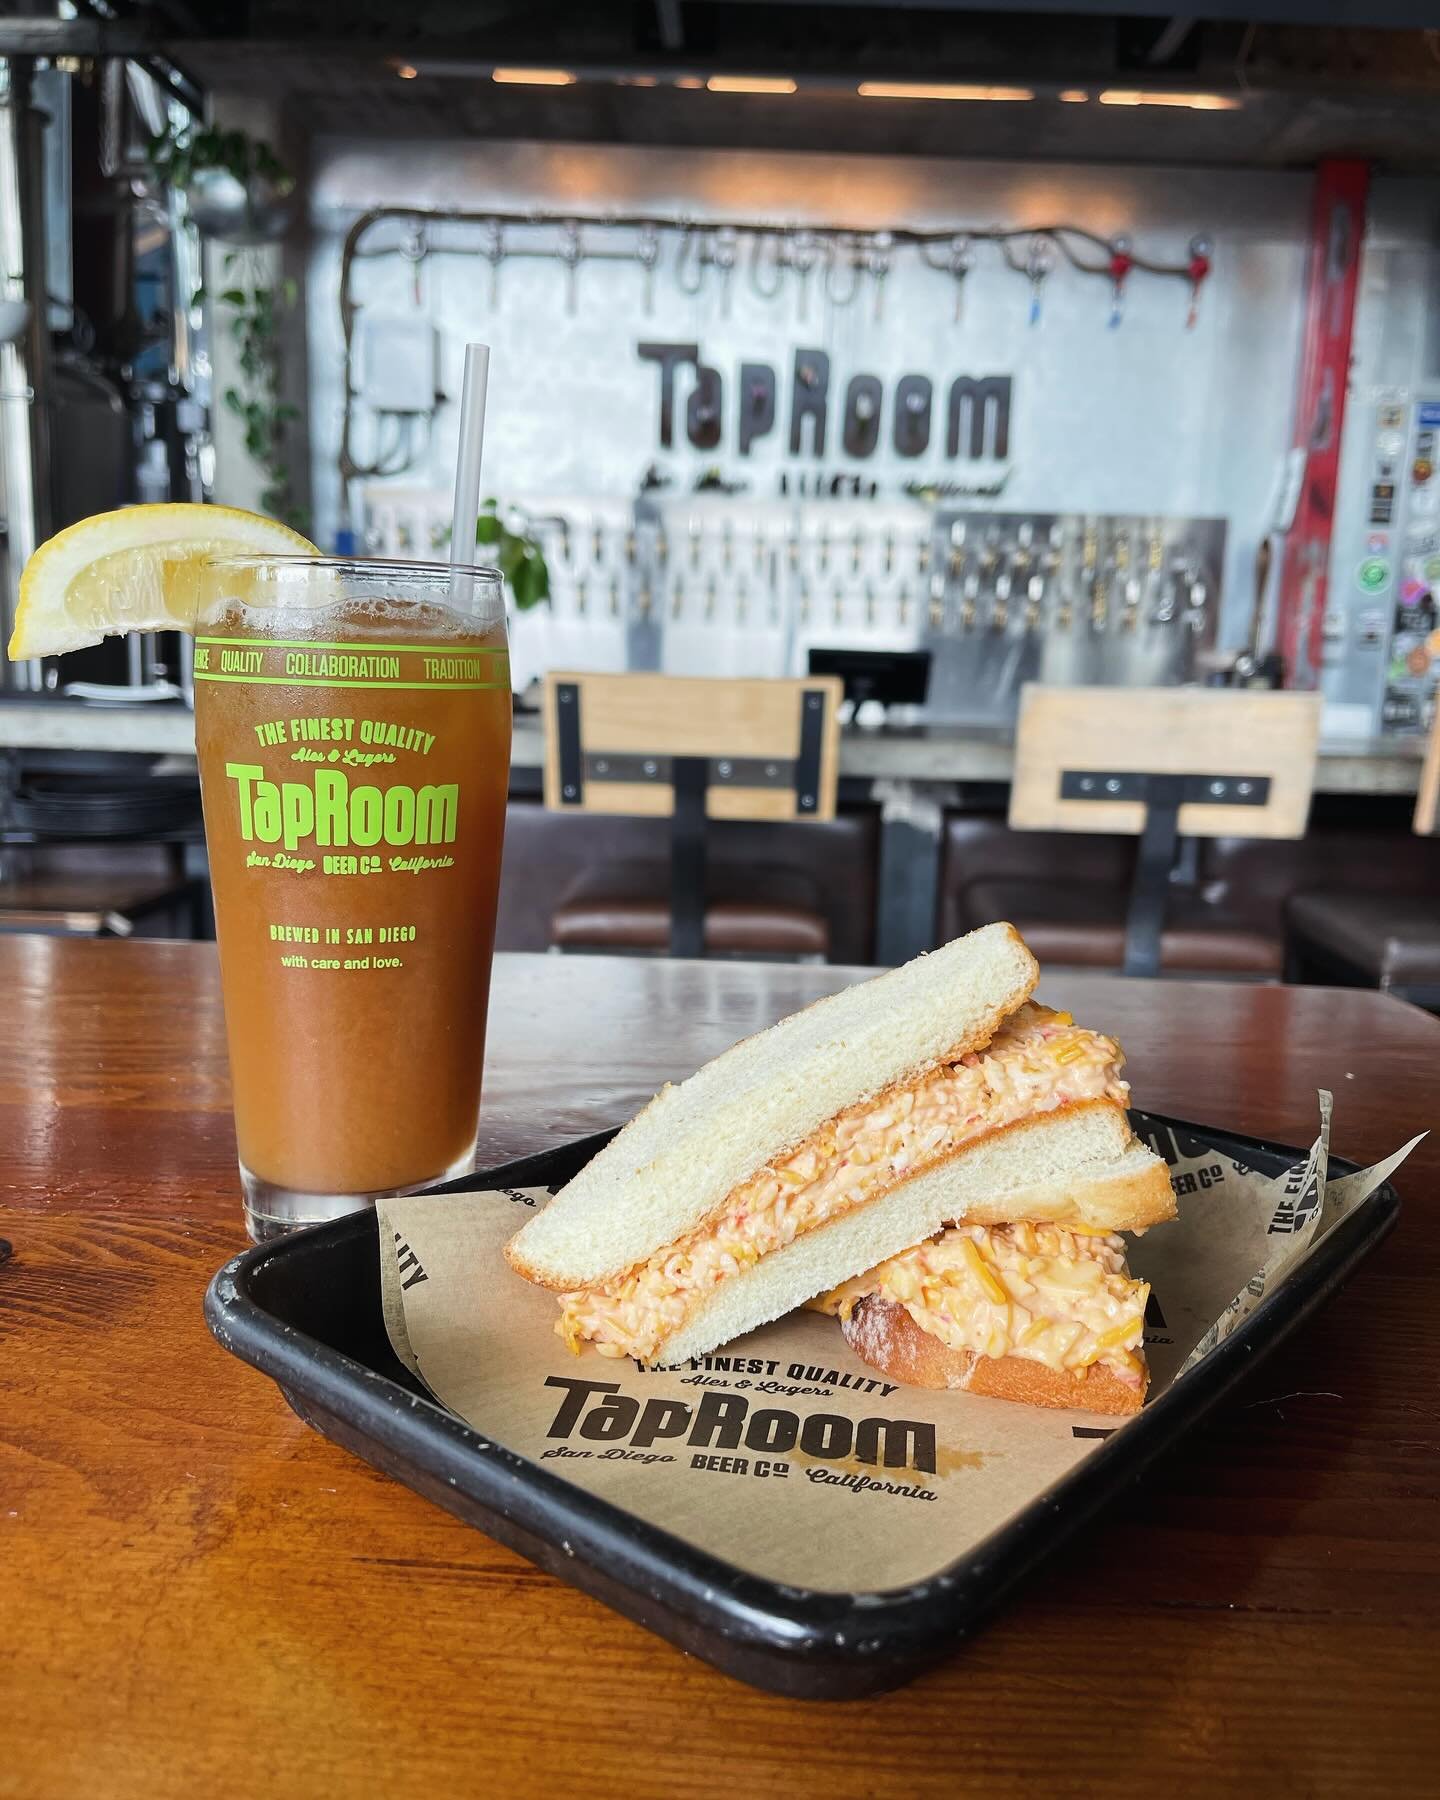 Pour Please, Now Driving . . .

&lsquo;Pimento Mori&rsquo;
sando with white bread and pimento cheese spread

&lsquo;Arnie Palm&rsquo;
Peach juice, iced tea, and lemonade.

In celebration of the most coveted tournament of the year, we thought it be ni